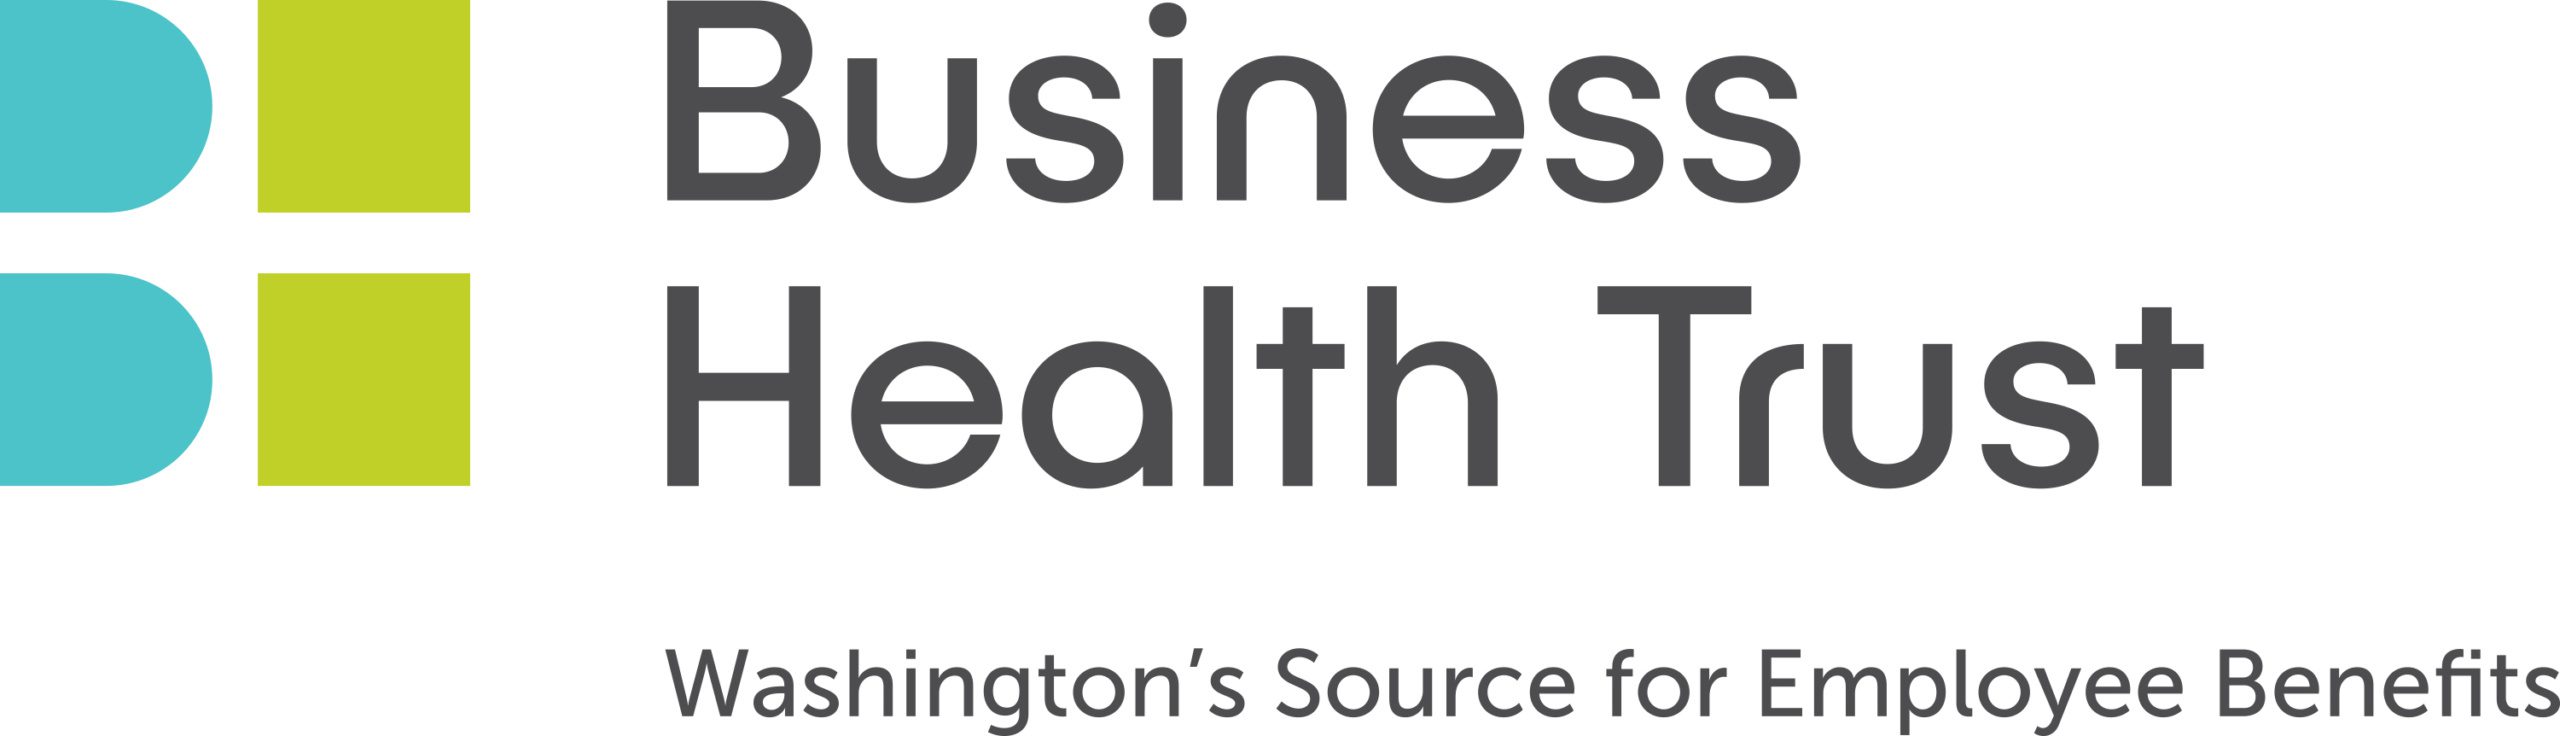 Business Health Trust- Group Insurance benefits for small businesses.